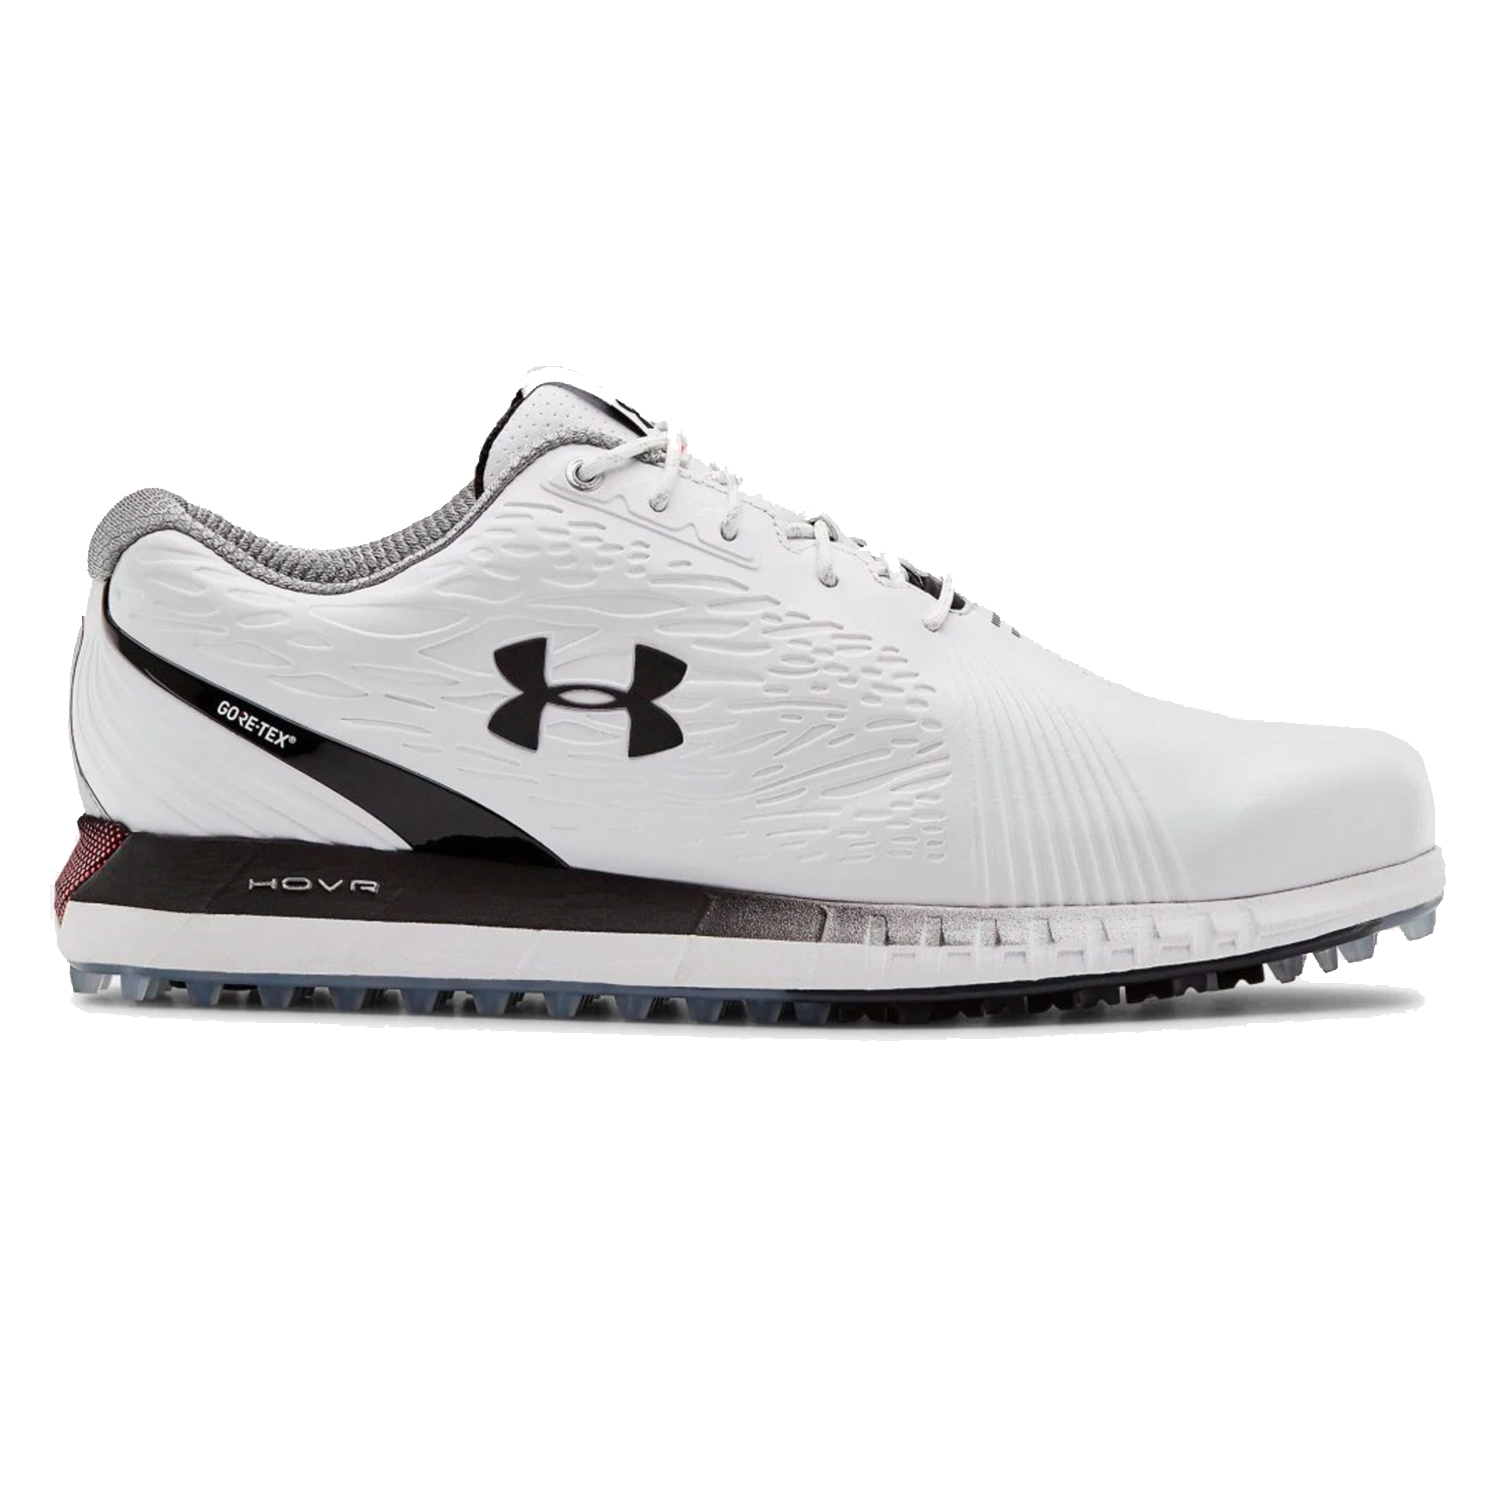 under armor hovr shoes